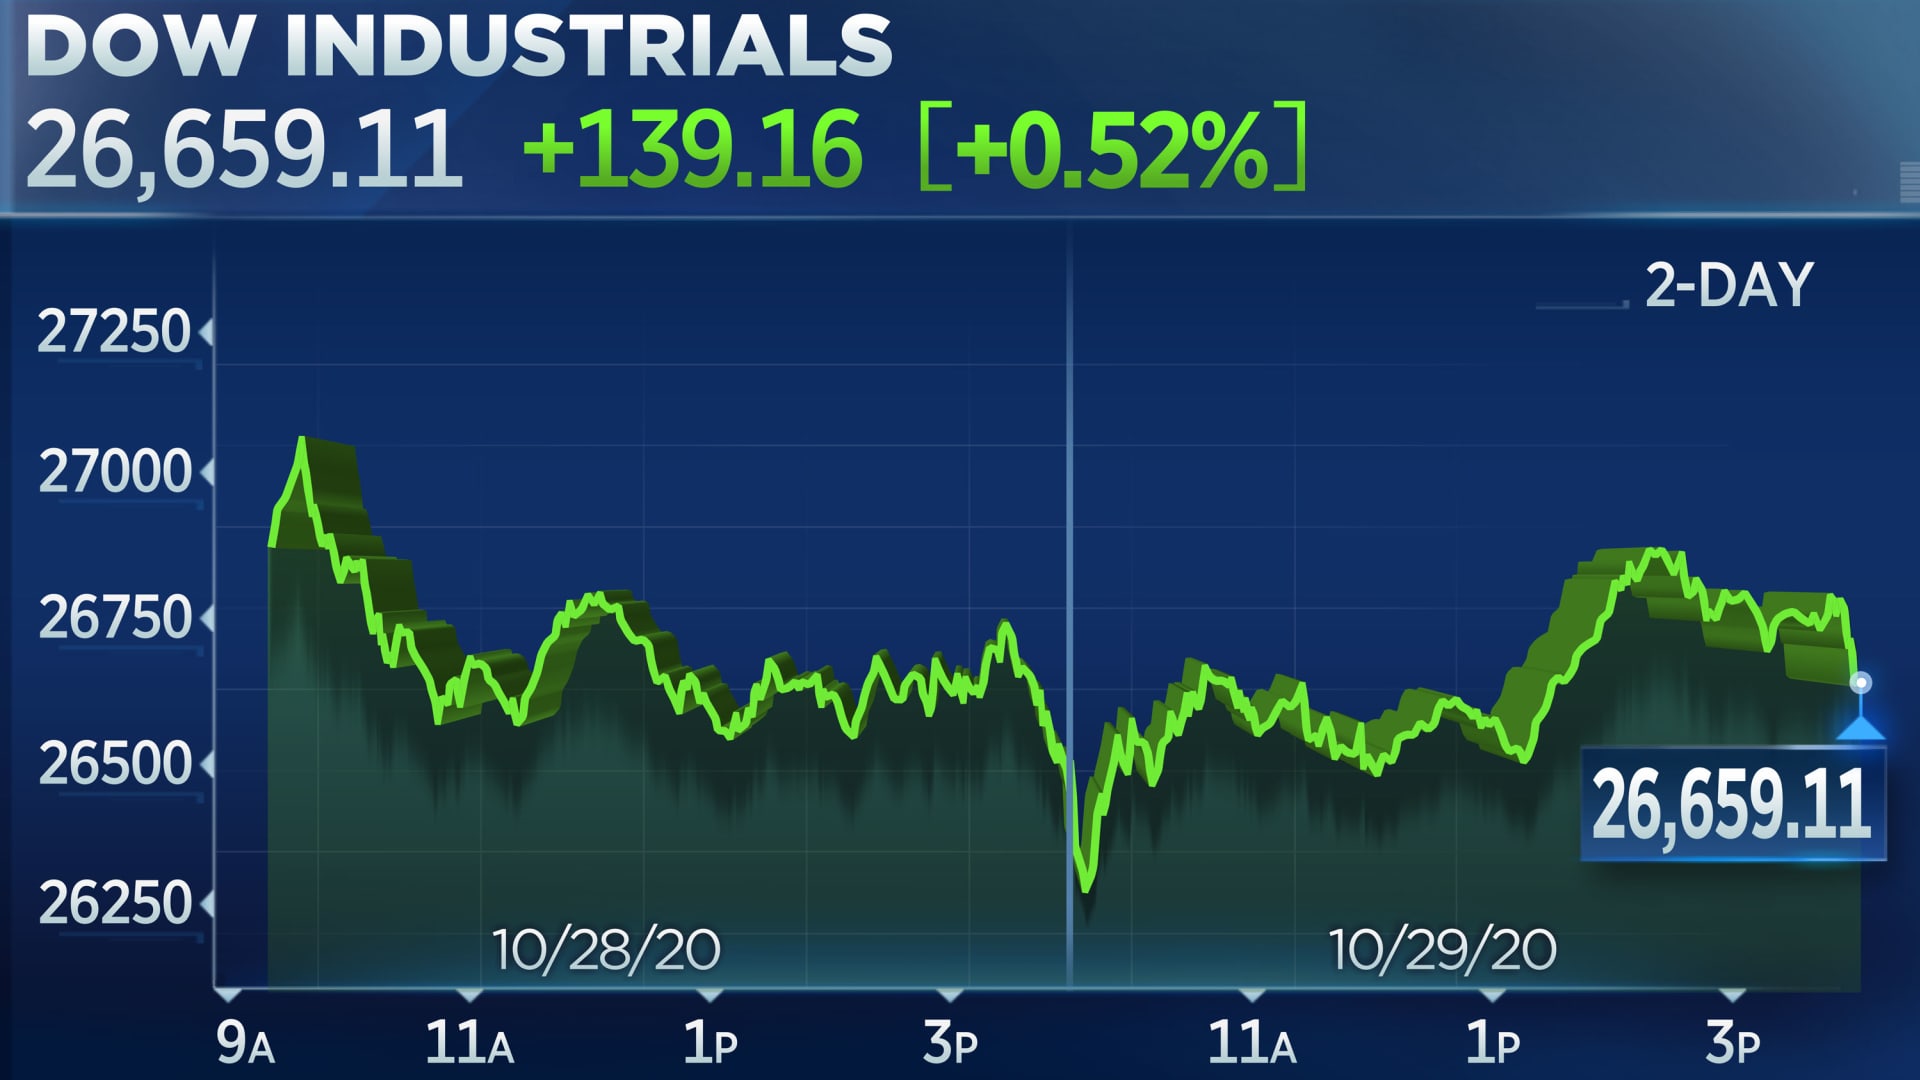 Stocks rebound from massive sell-off, S&P 500 closes more than 1% higher as tech gains